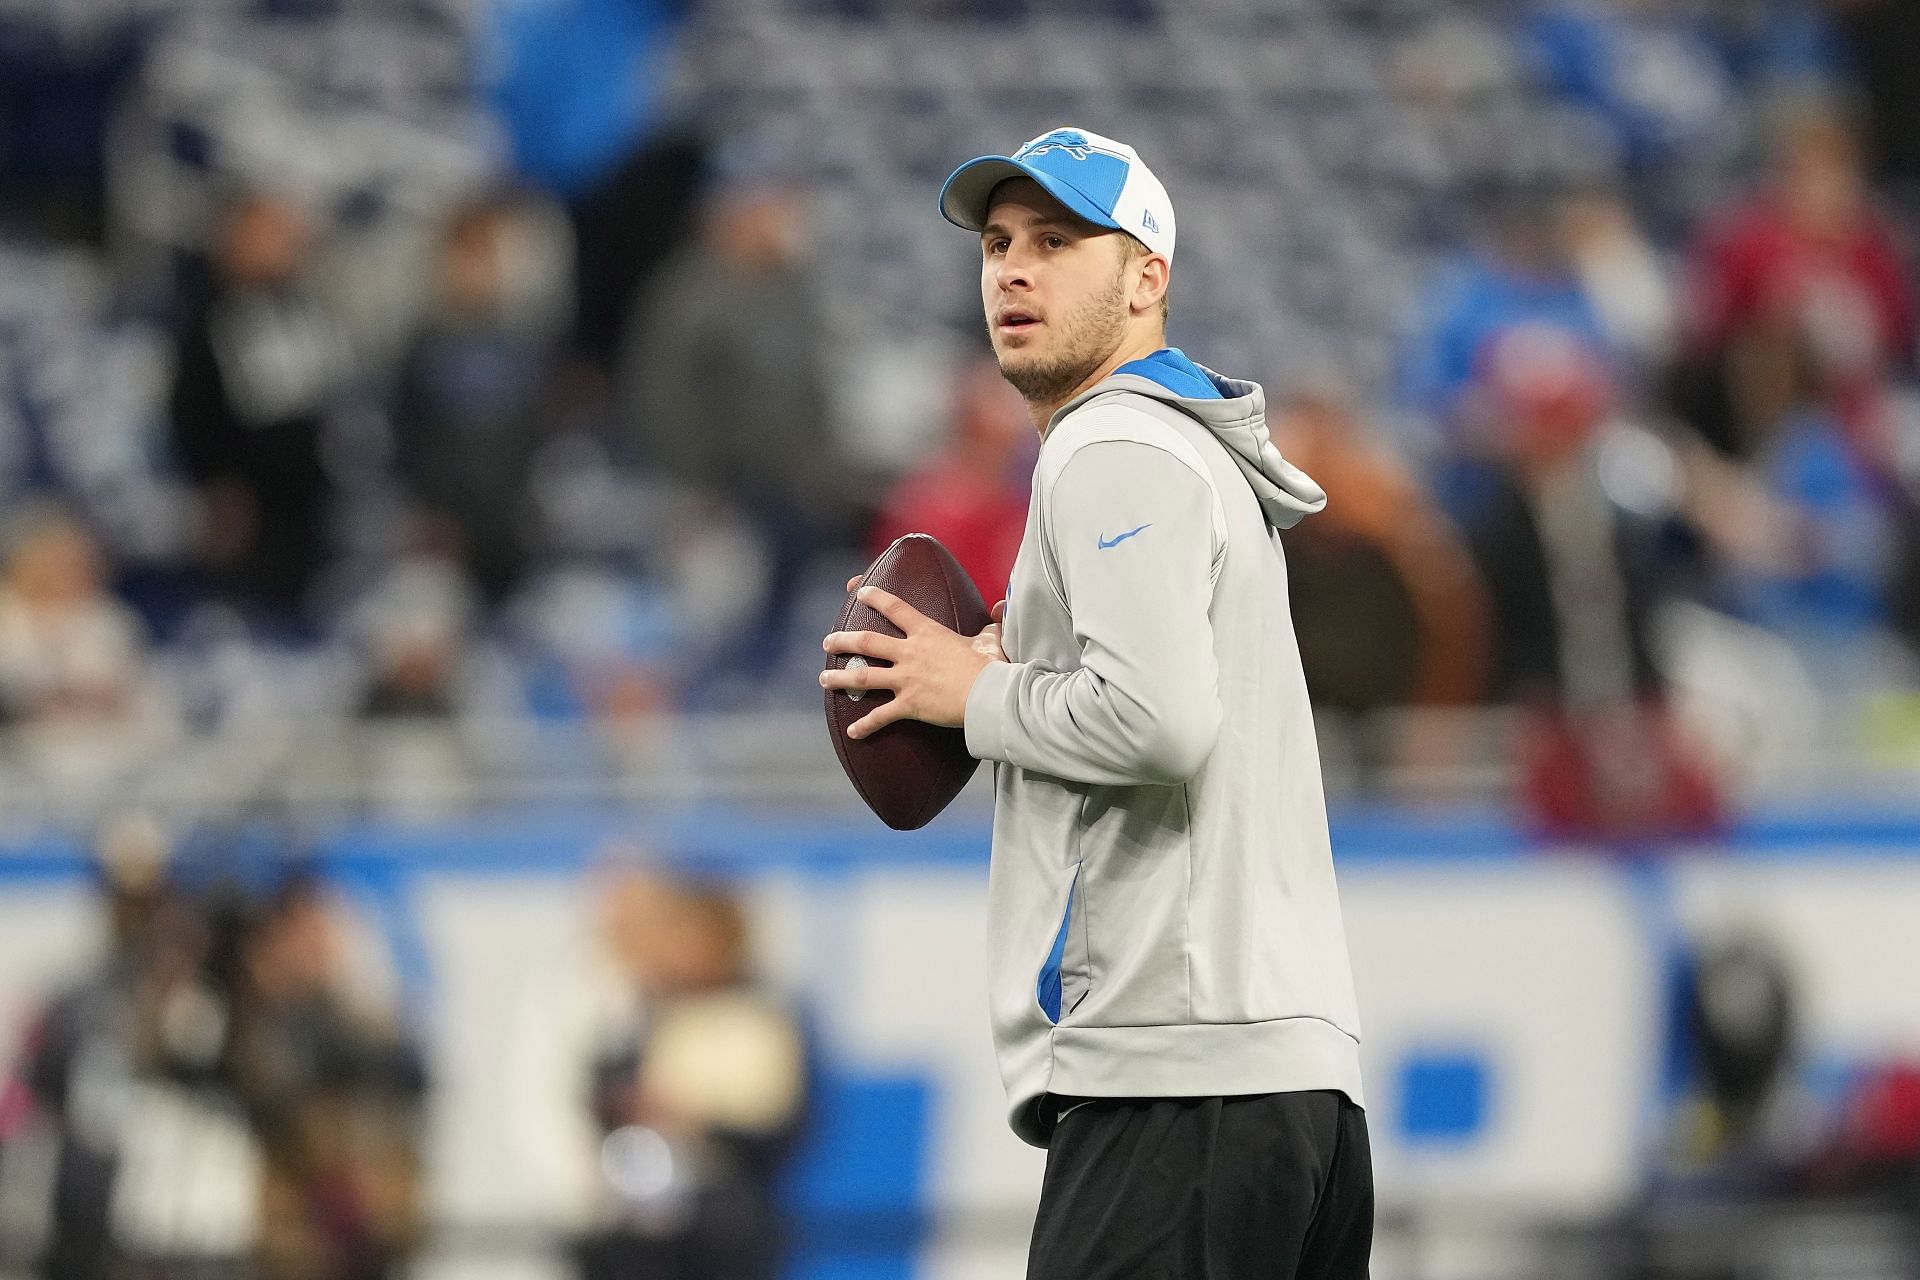 Jared Goff at NFC Divisional Playoffs: Tampa Bay Buccaneers vs. Detroit Lions